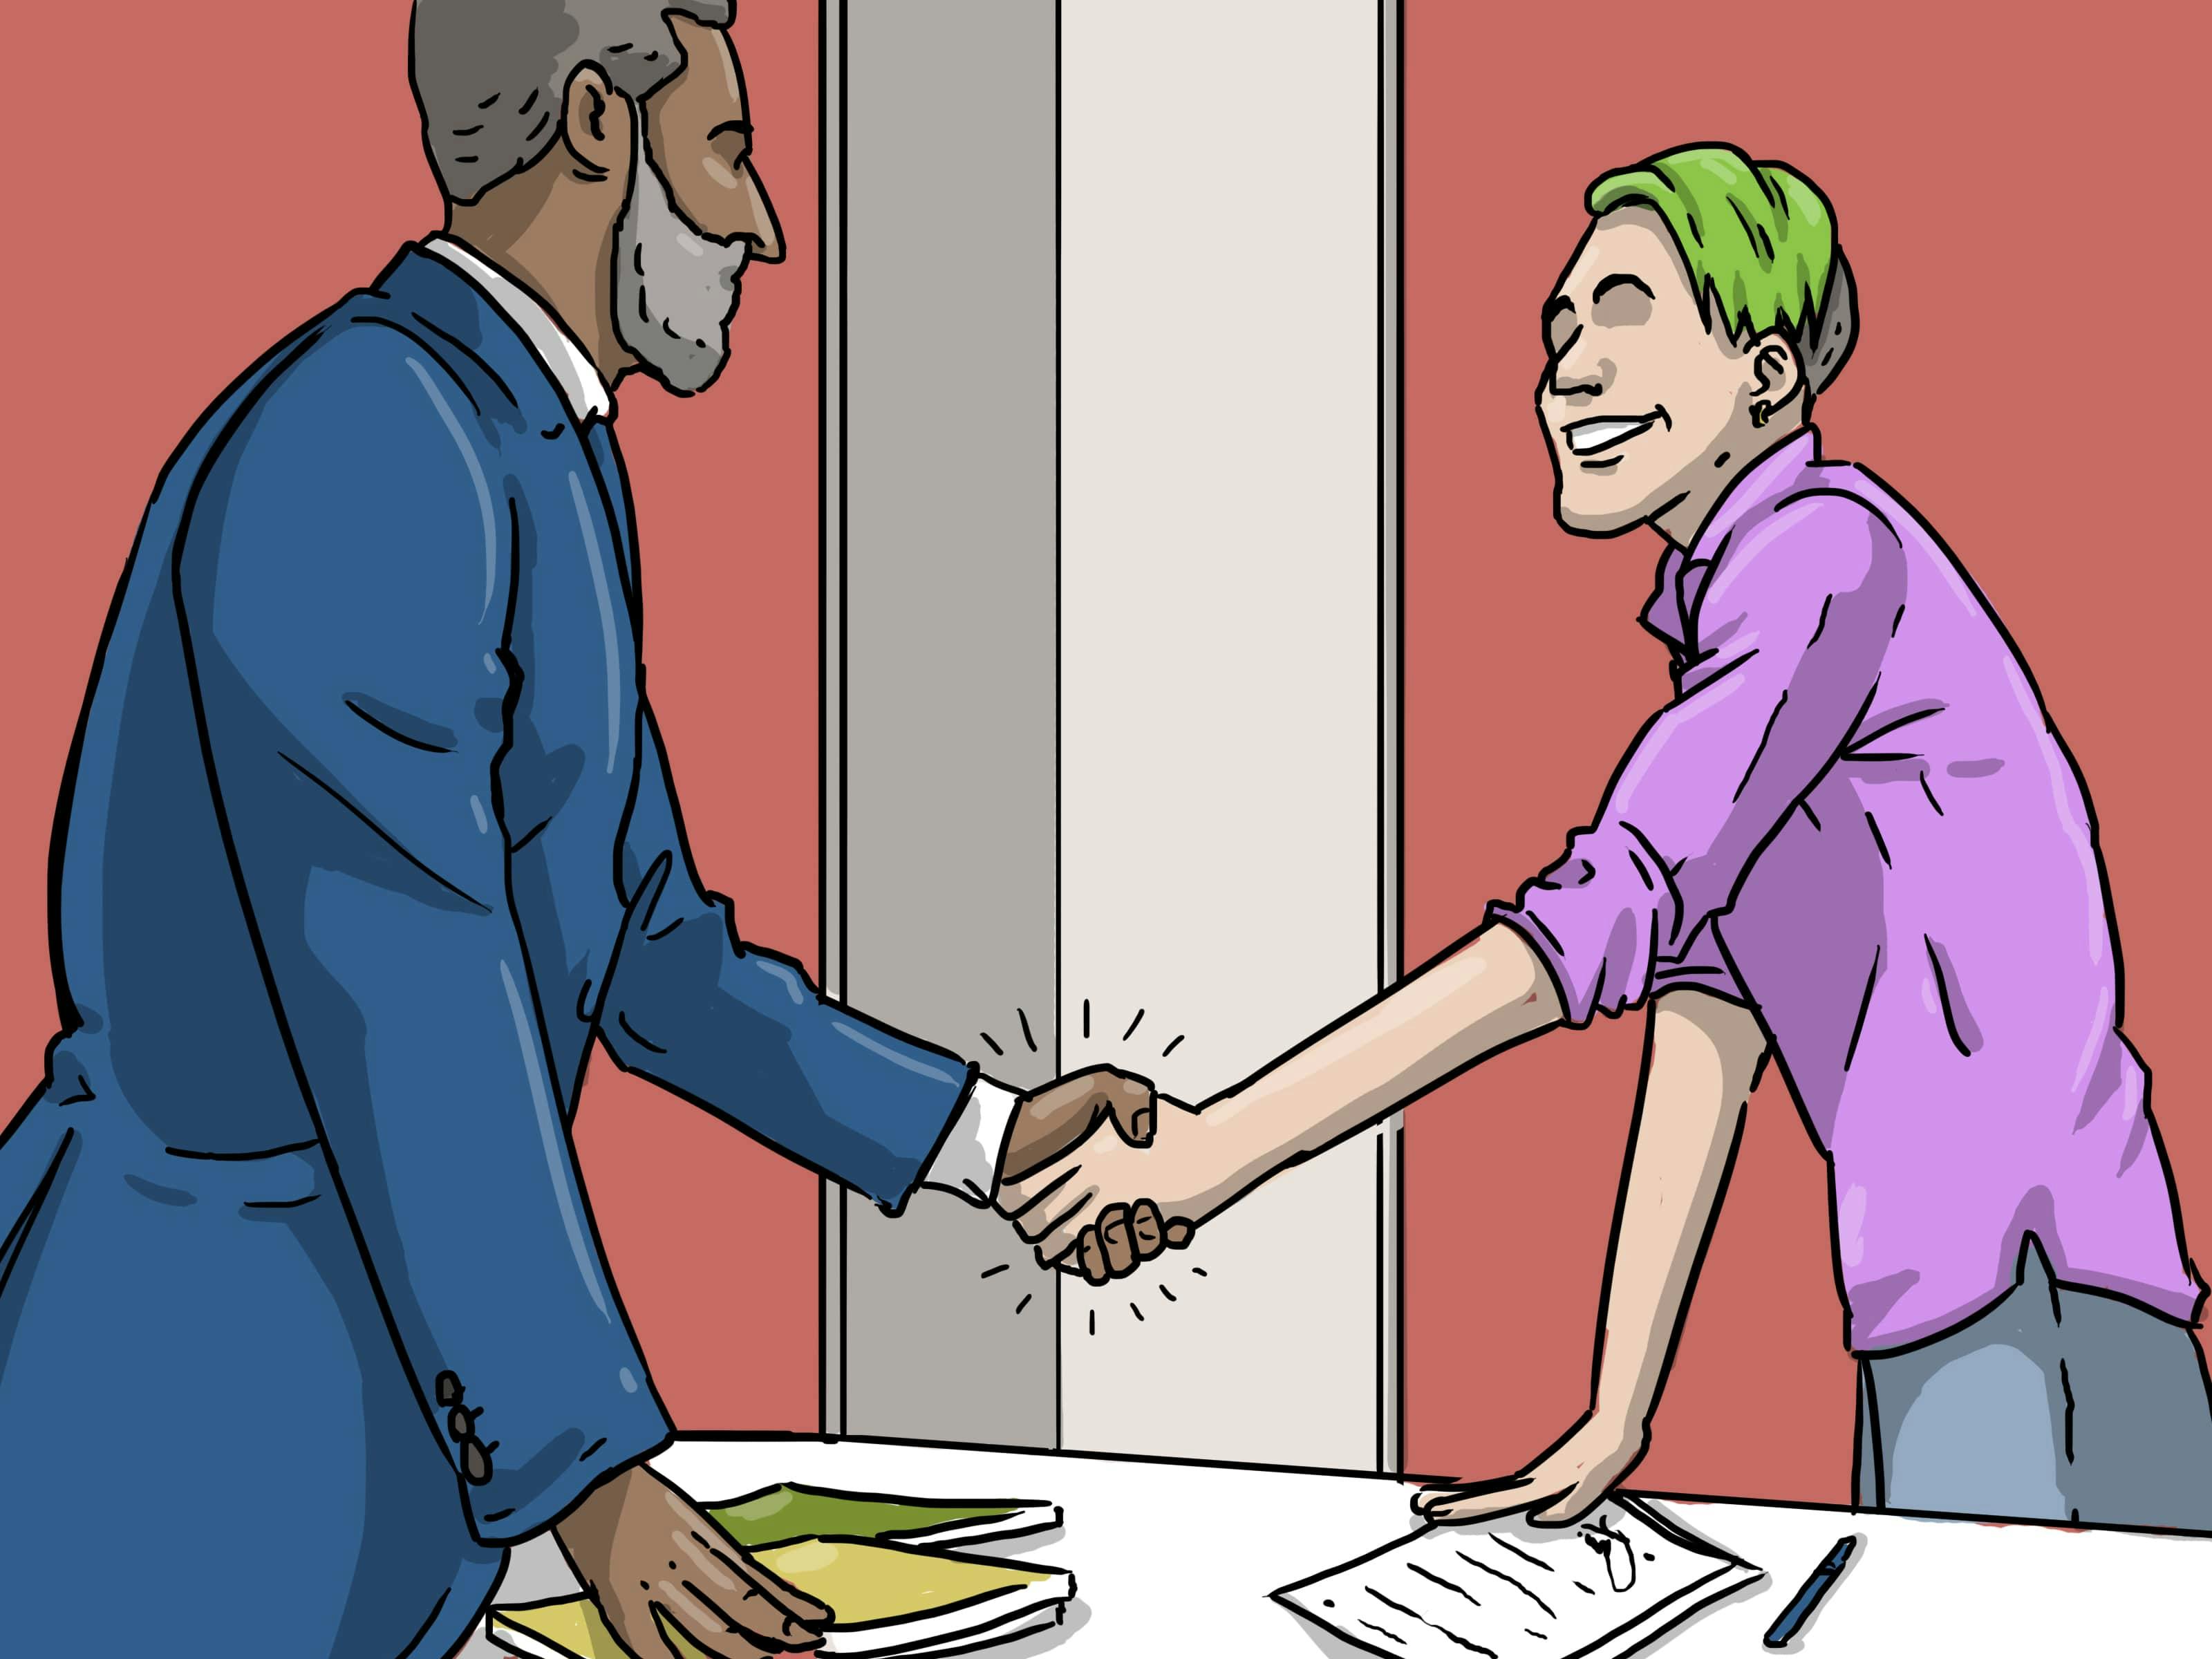 A firm handshake seals the deal after a successful salary negotiation.